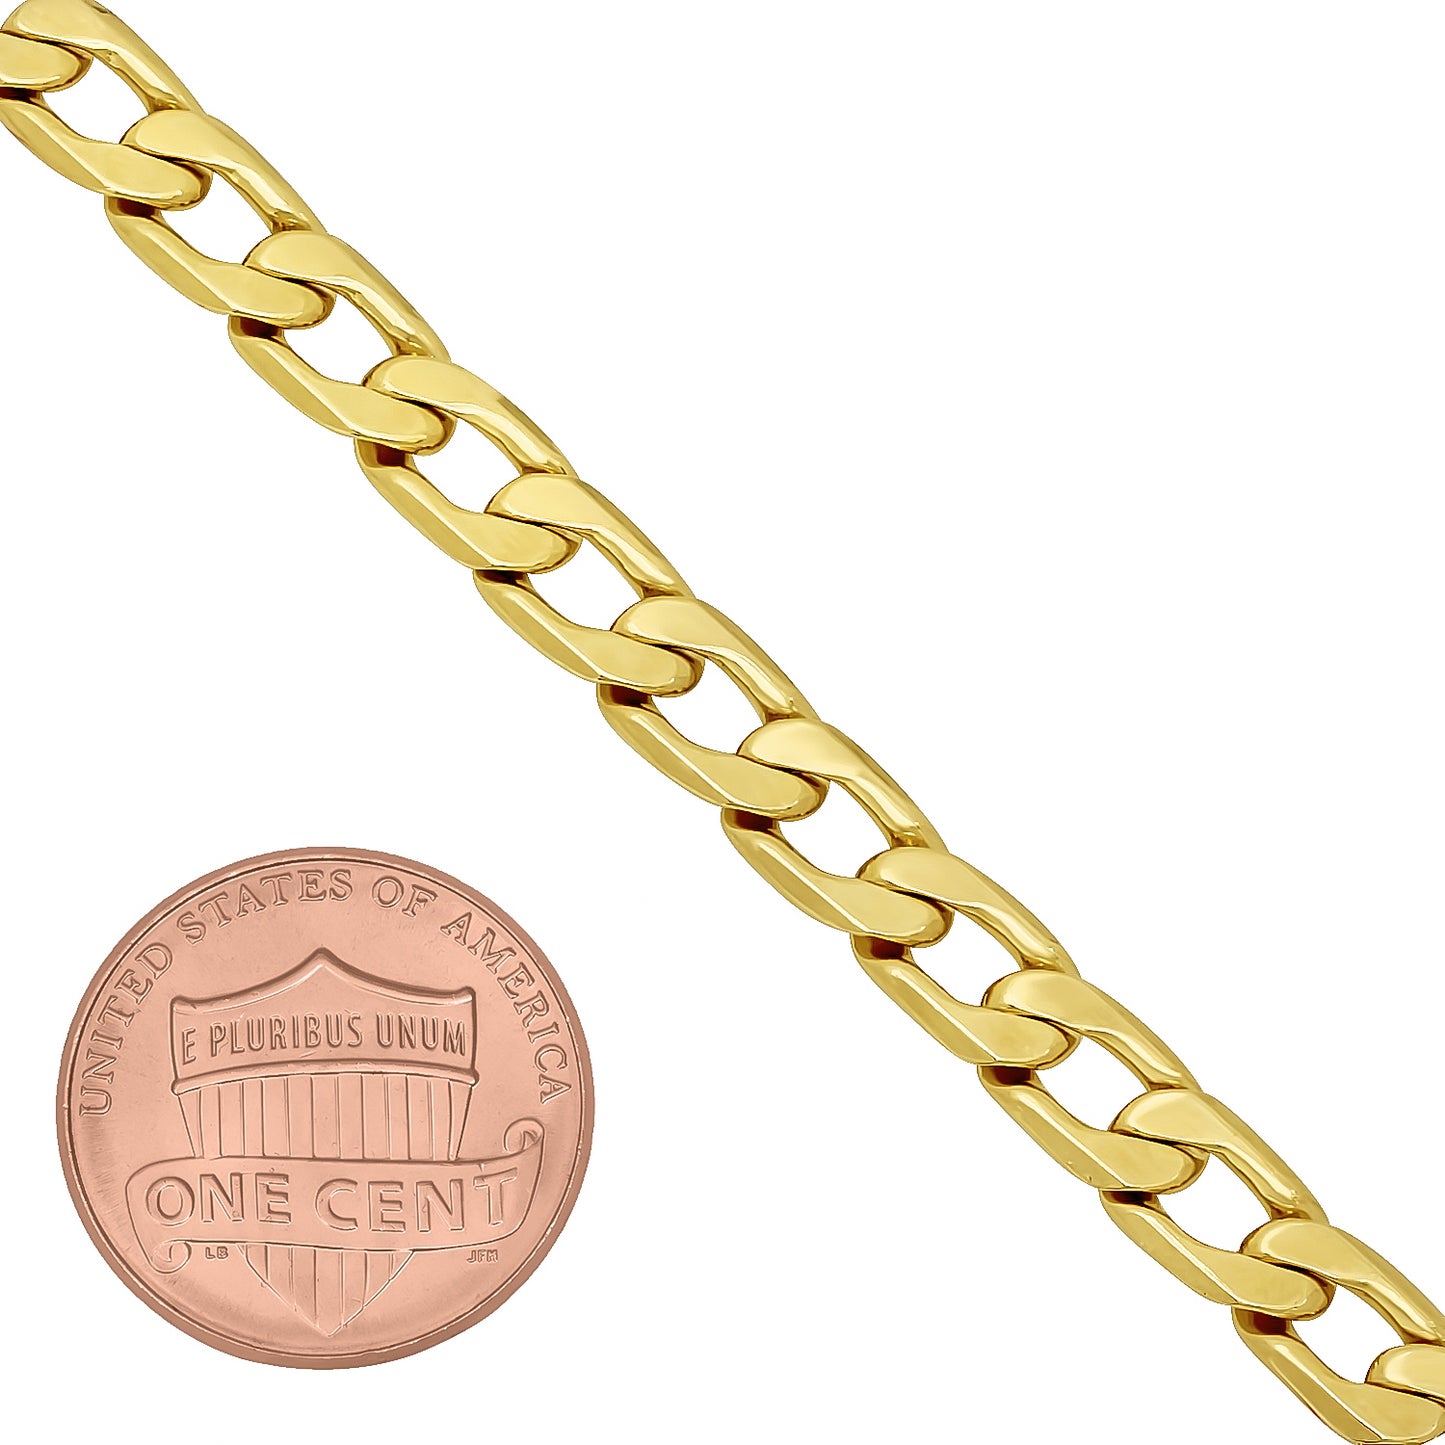 6mm 14k Yellow Gold Plated Flat Curb Chain Anklet (SKU: GL-CURB-ANKLETS)